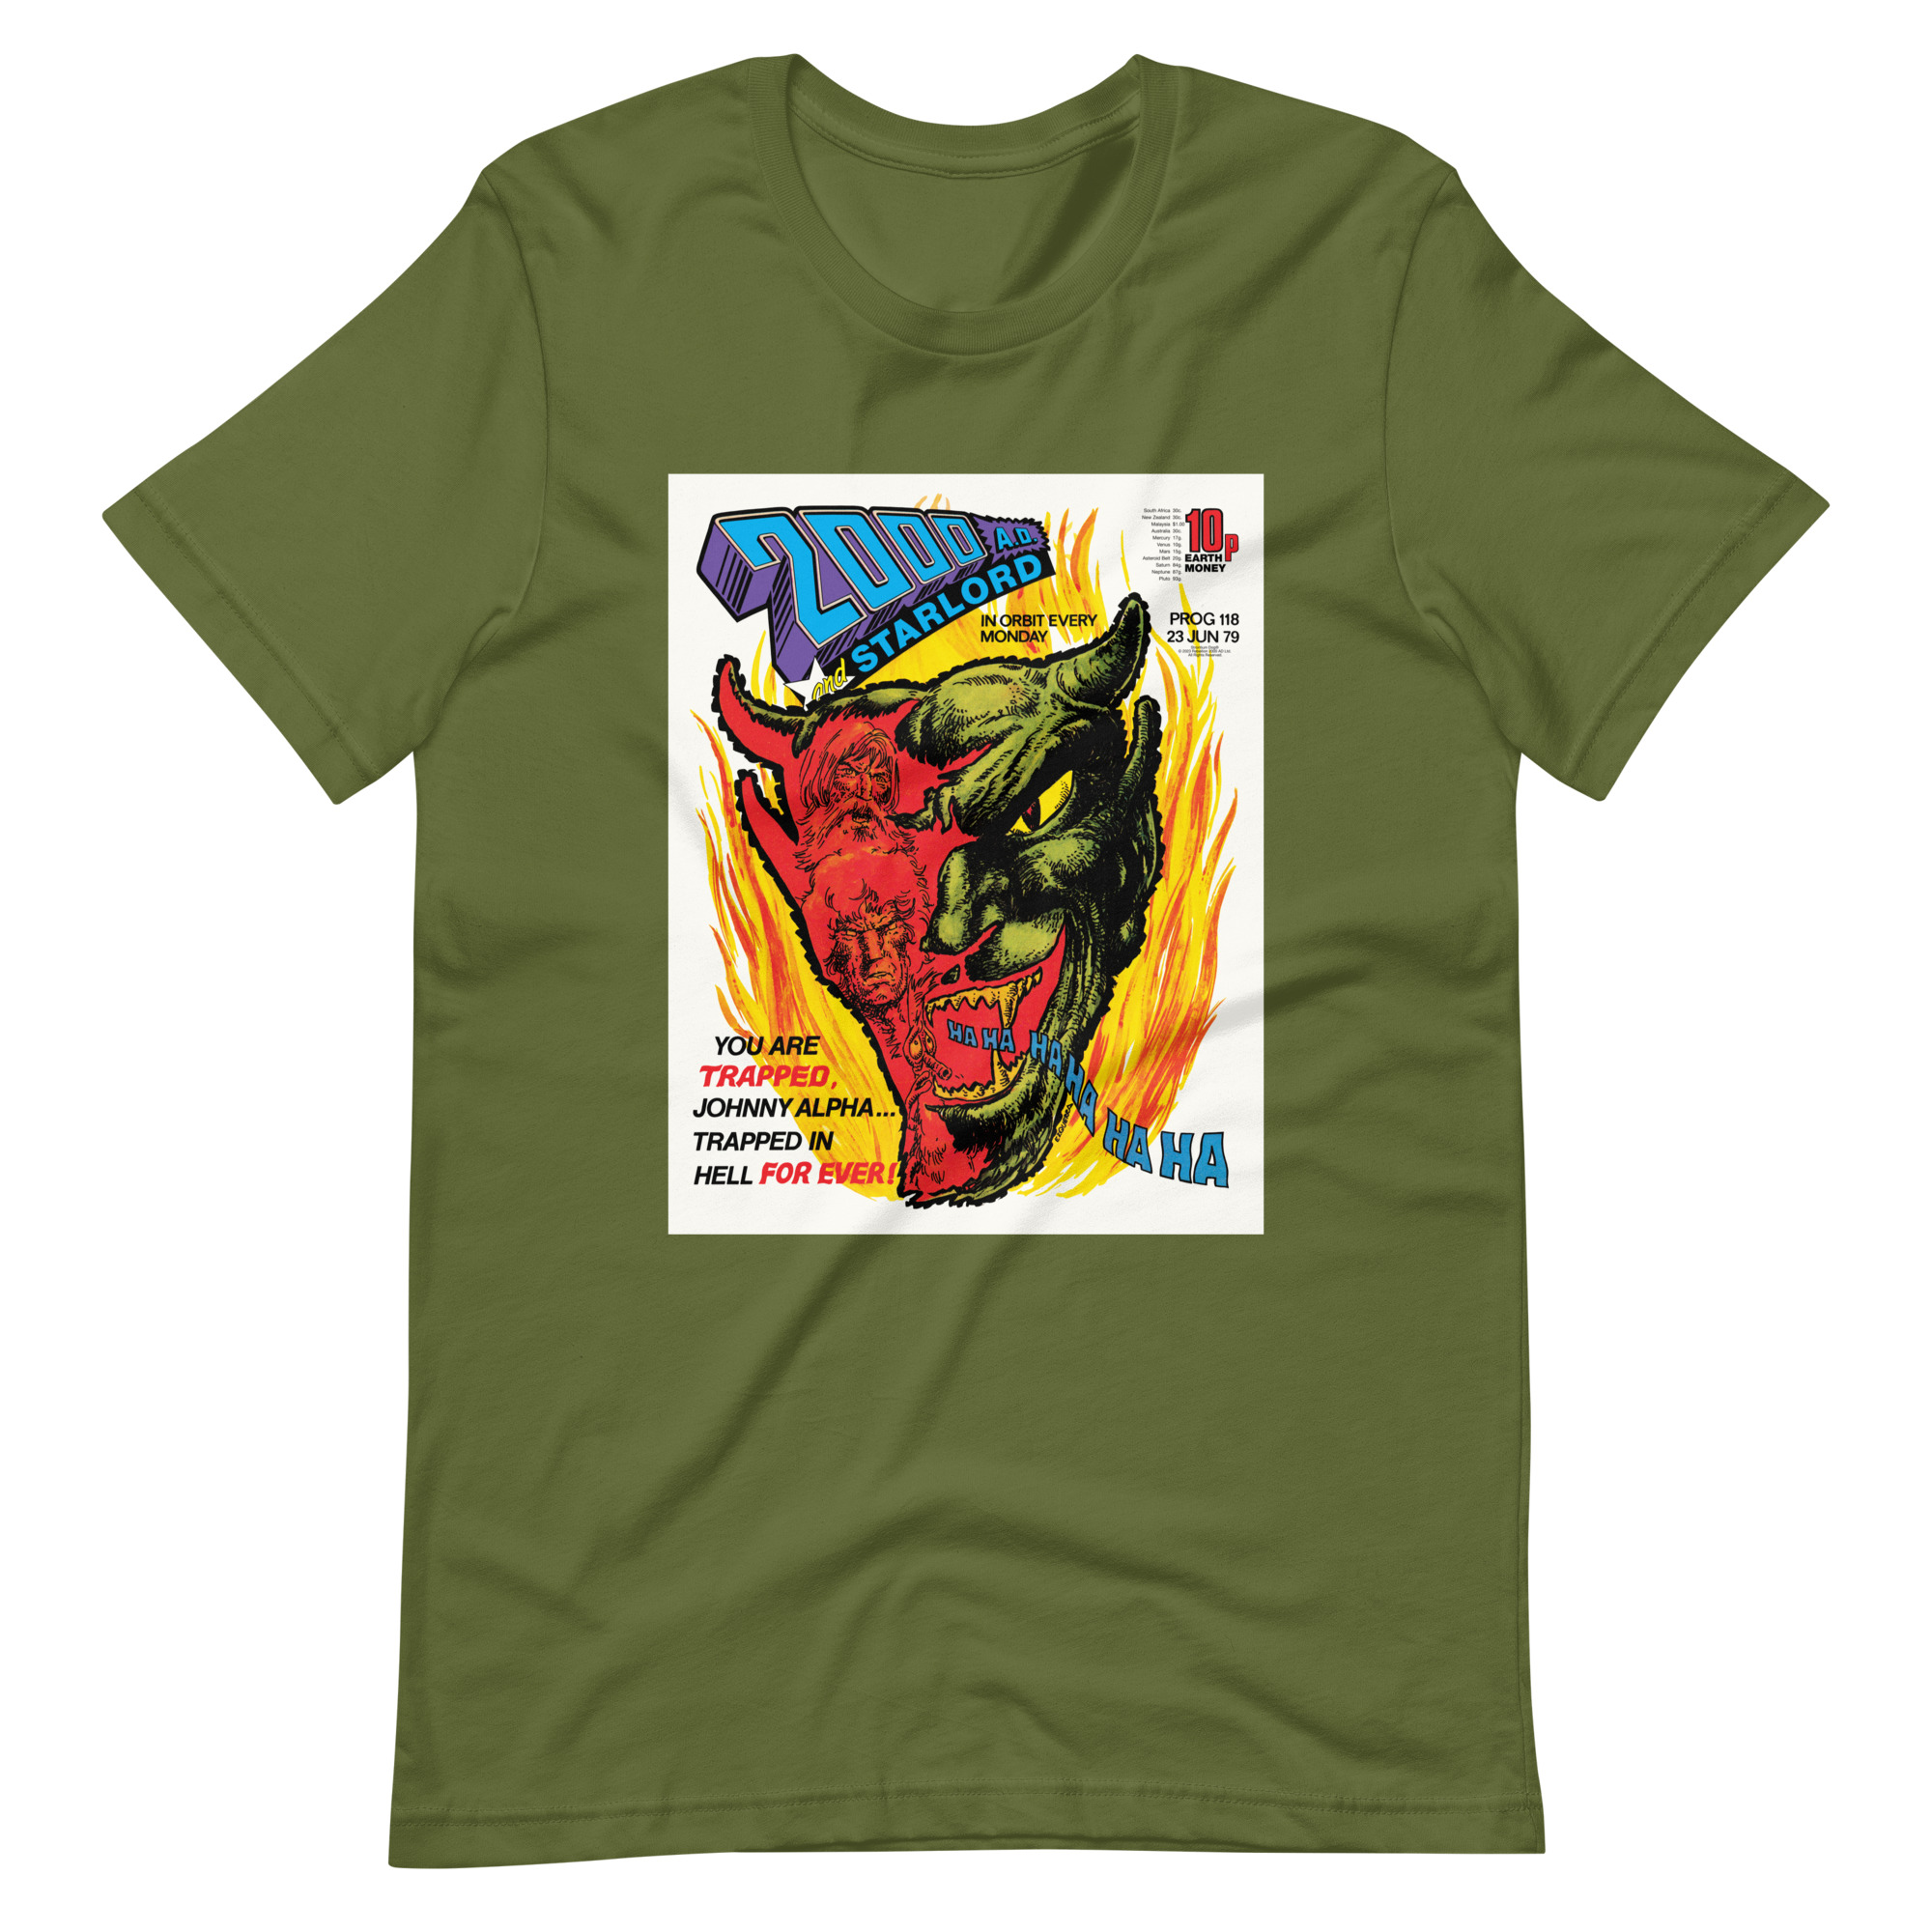 Olive Green Tshirt with an image on the chest. Image is cover of 2000 AD prog 118 and depicts a laughing Devil face in flames